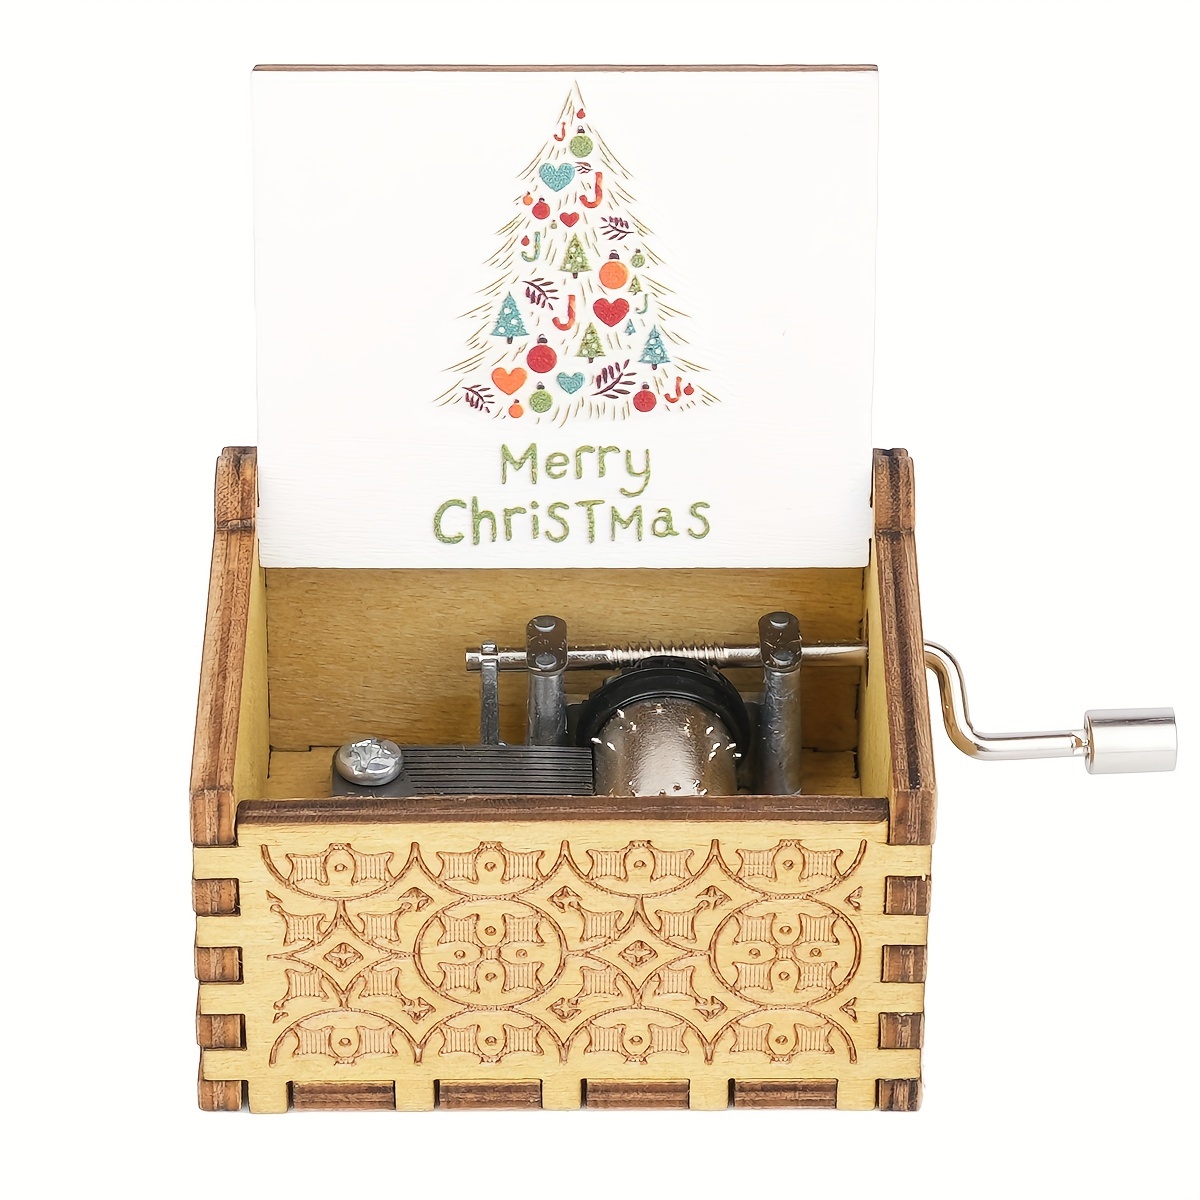 Engraved Wooden Christmas Box for Her